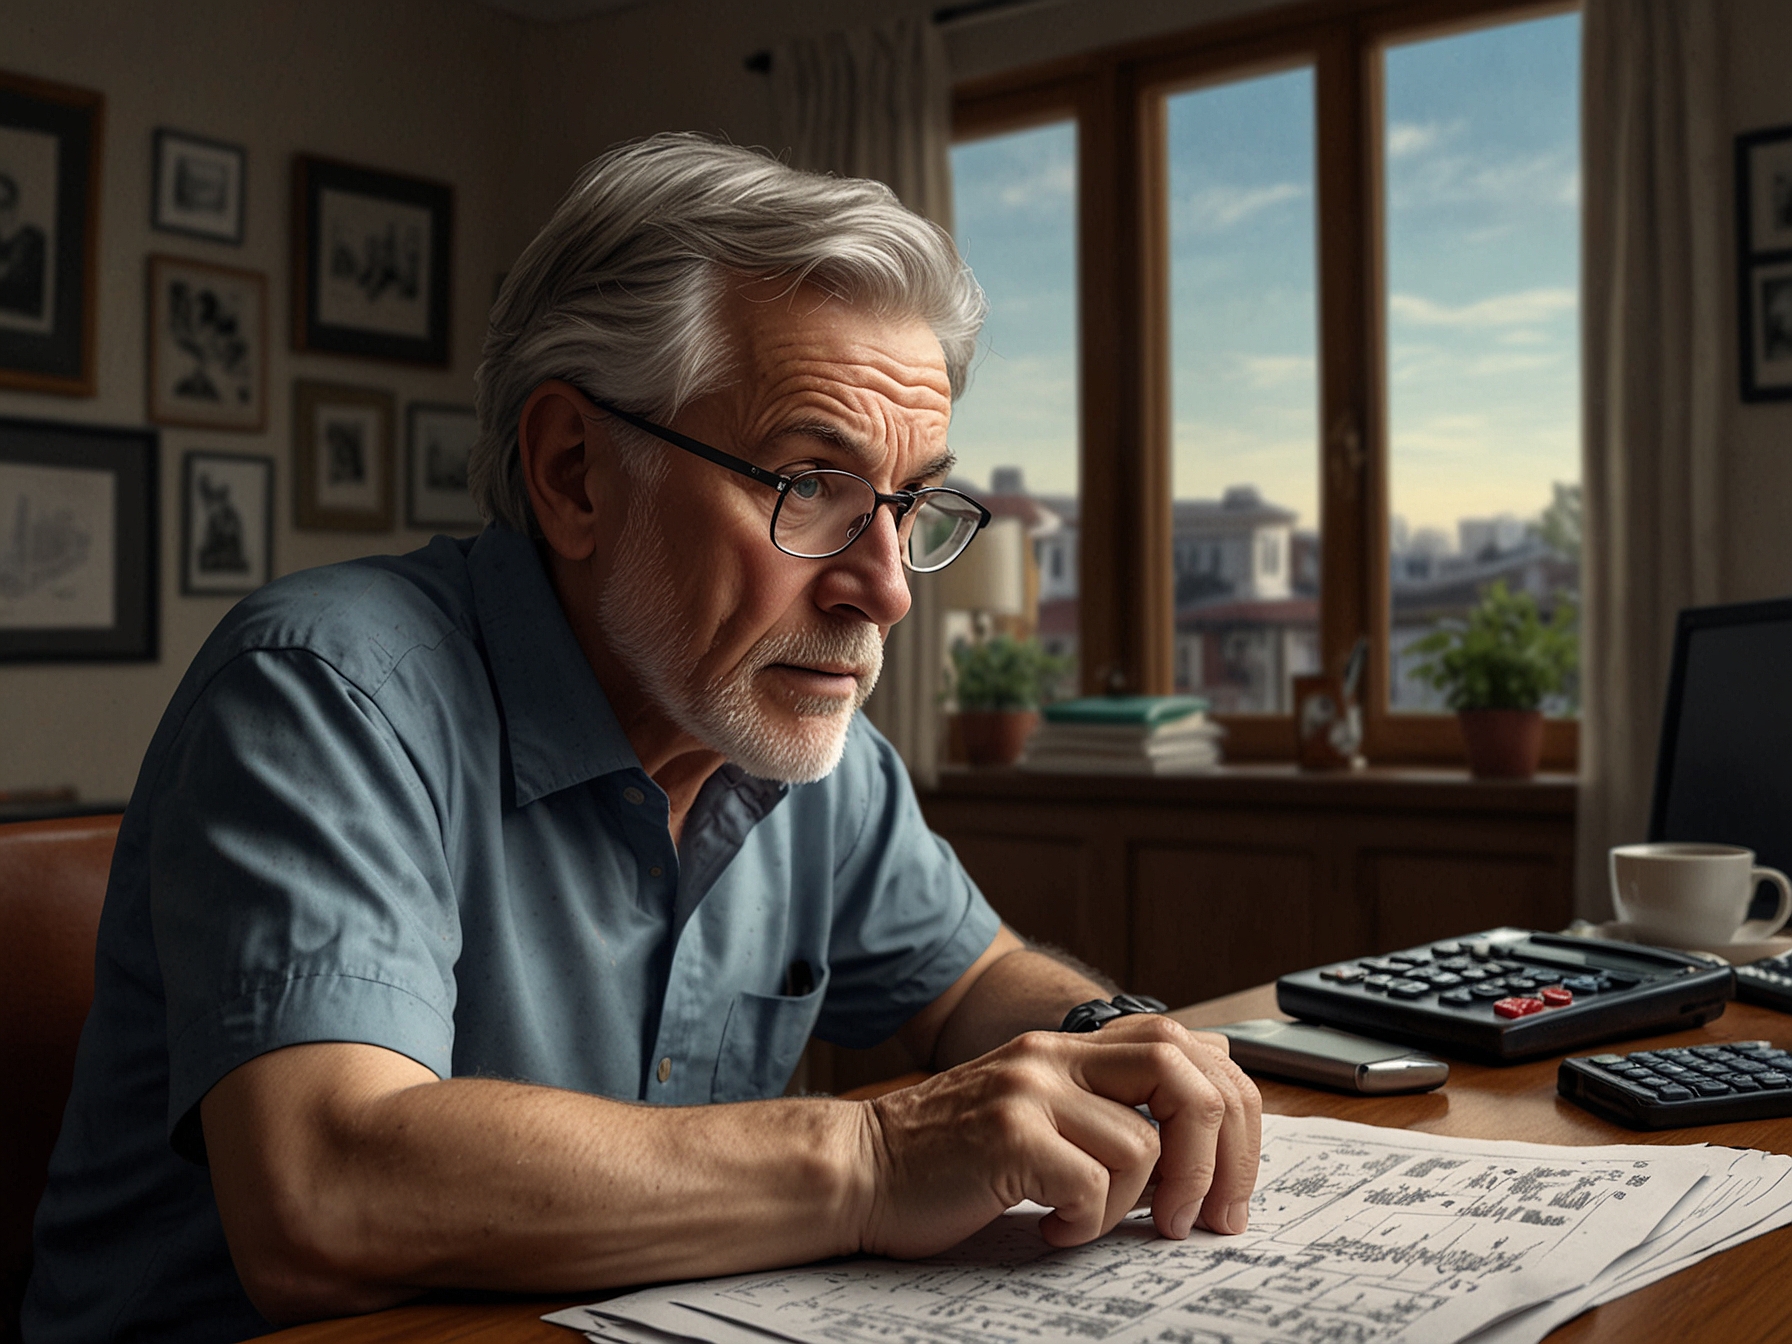 A worried Gen Xer looks at financial documents and a calculator in their home office, illustrating the financial anxieties and retirement challenges faced by this demographic.